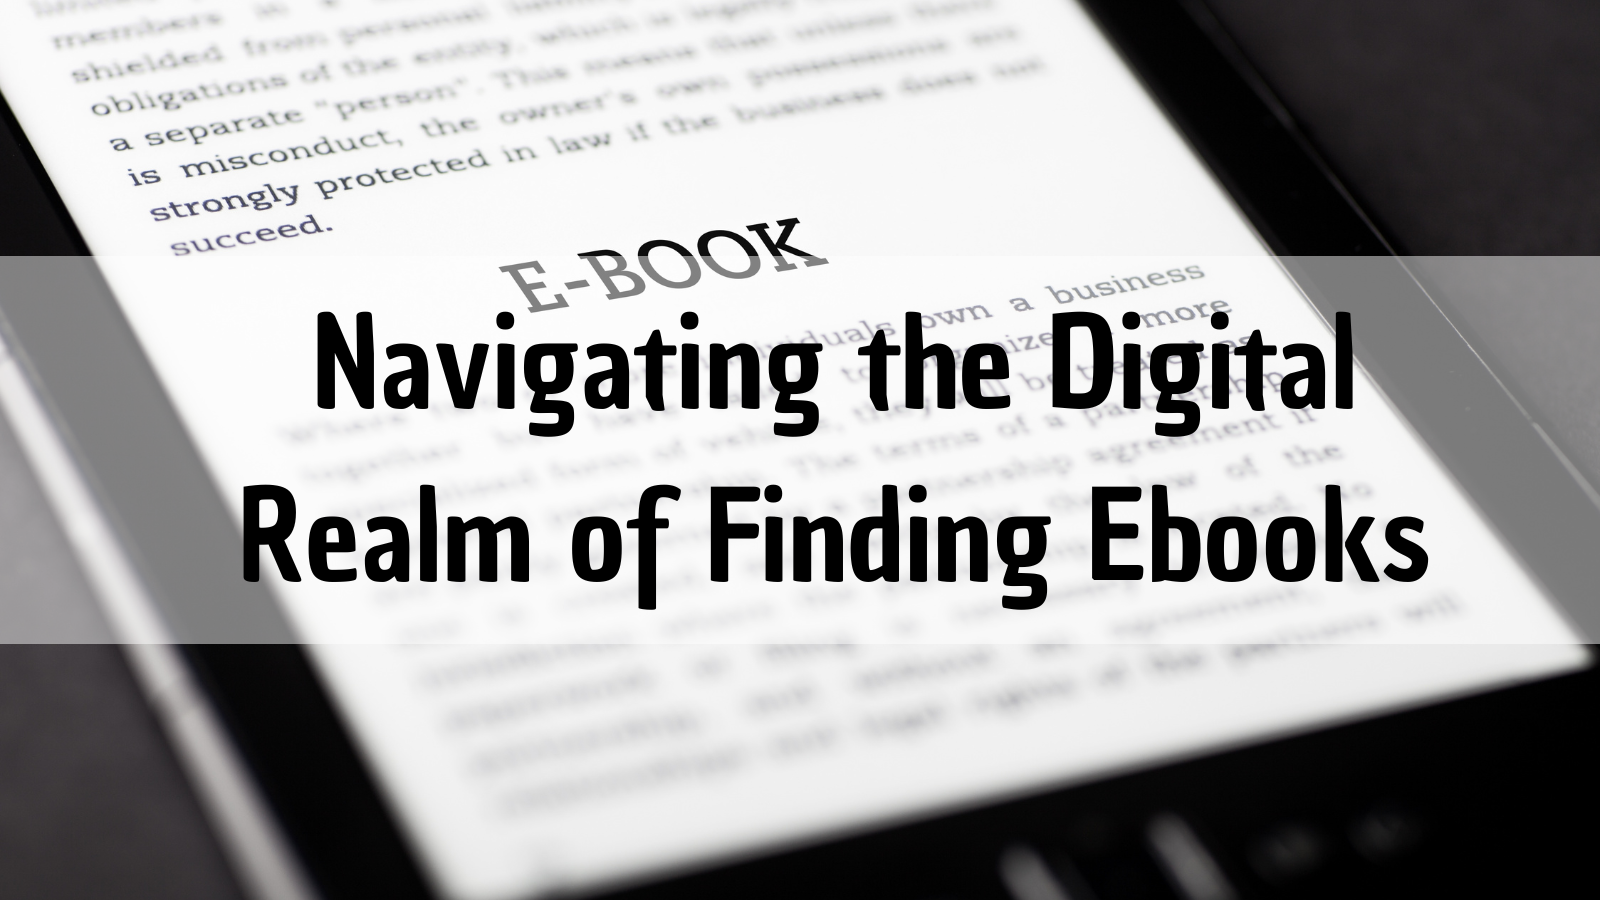 Navigating the Digital Realm of Finding Ebooks